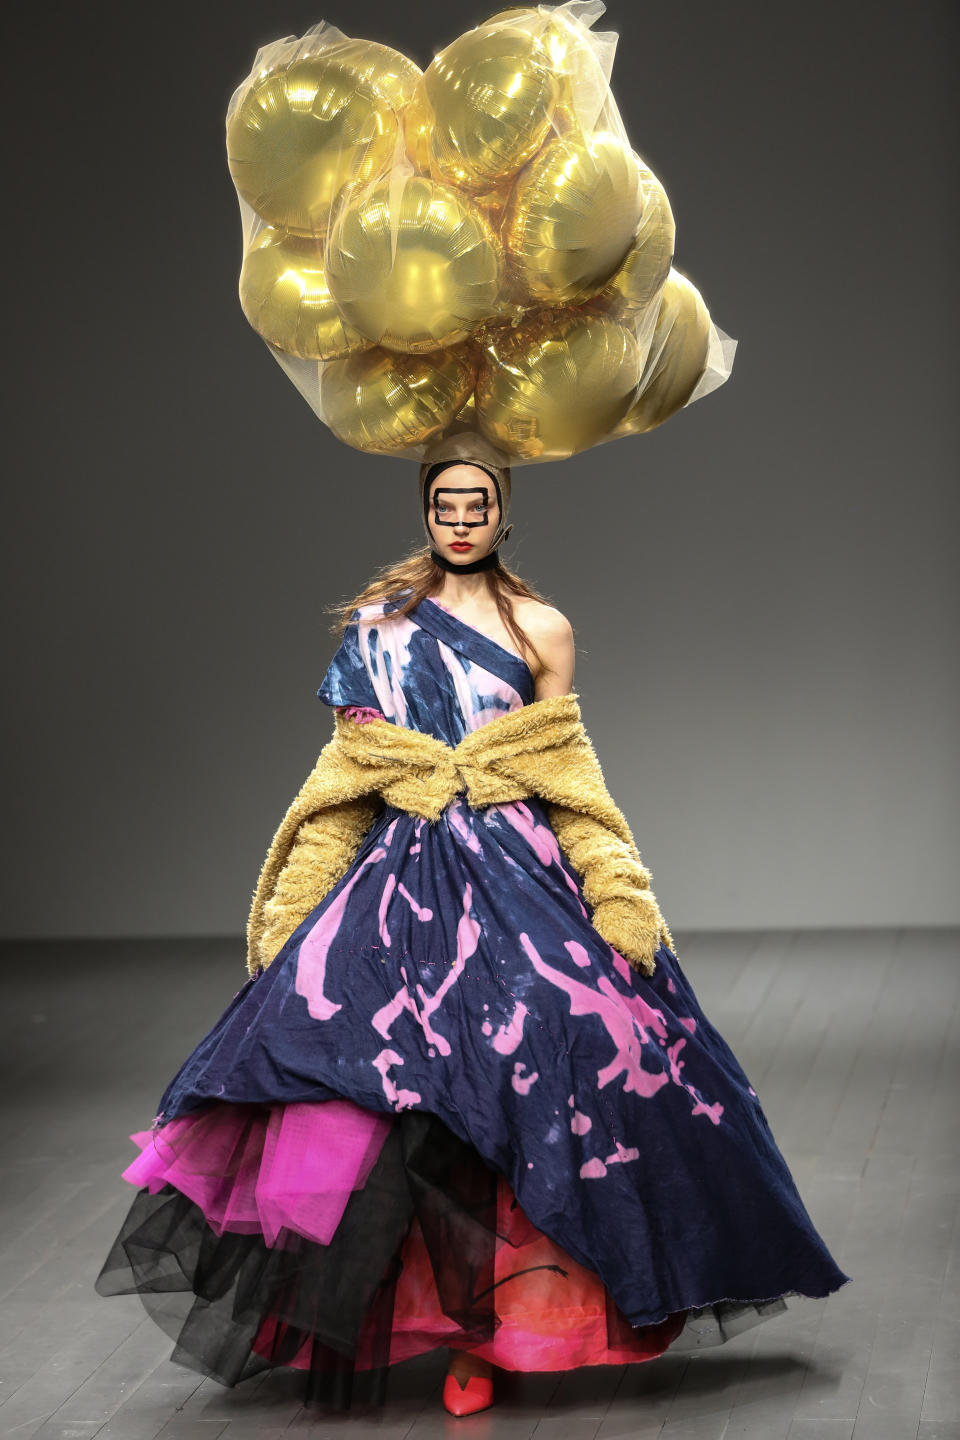 For his show during London Fashion Week, Matty Bovan went for a high fashion "Up" aesthetic.